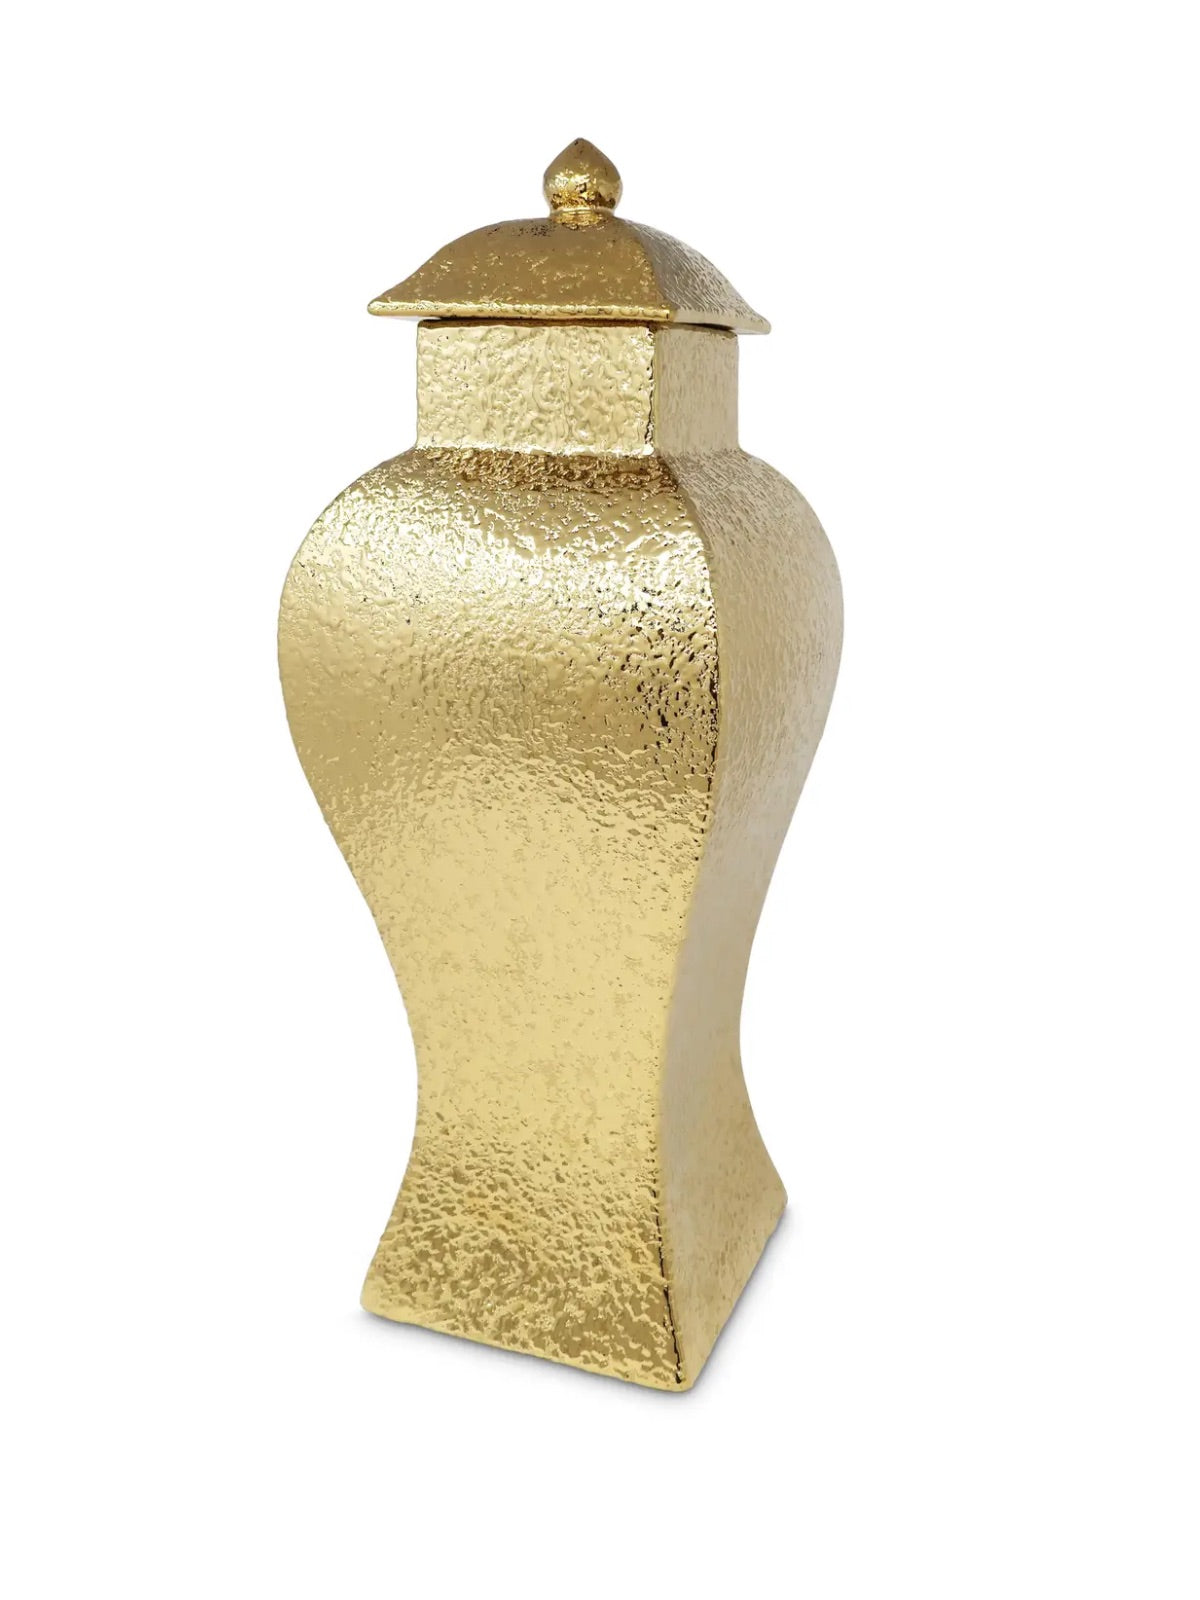 Hammered Gold Ginger Jar with Lid - Luxurious Home Decor Accent - Available in Large Sizes